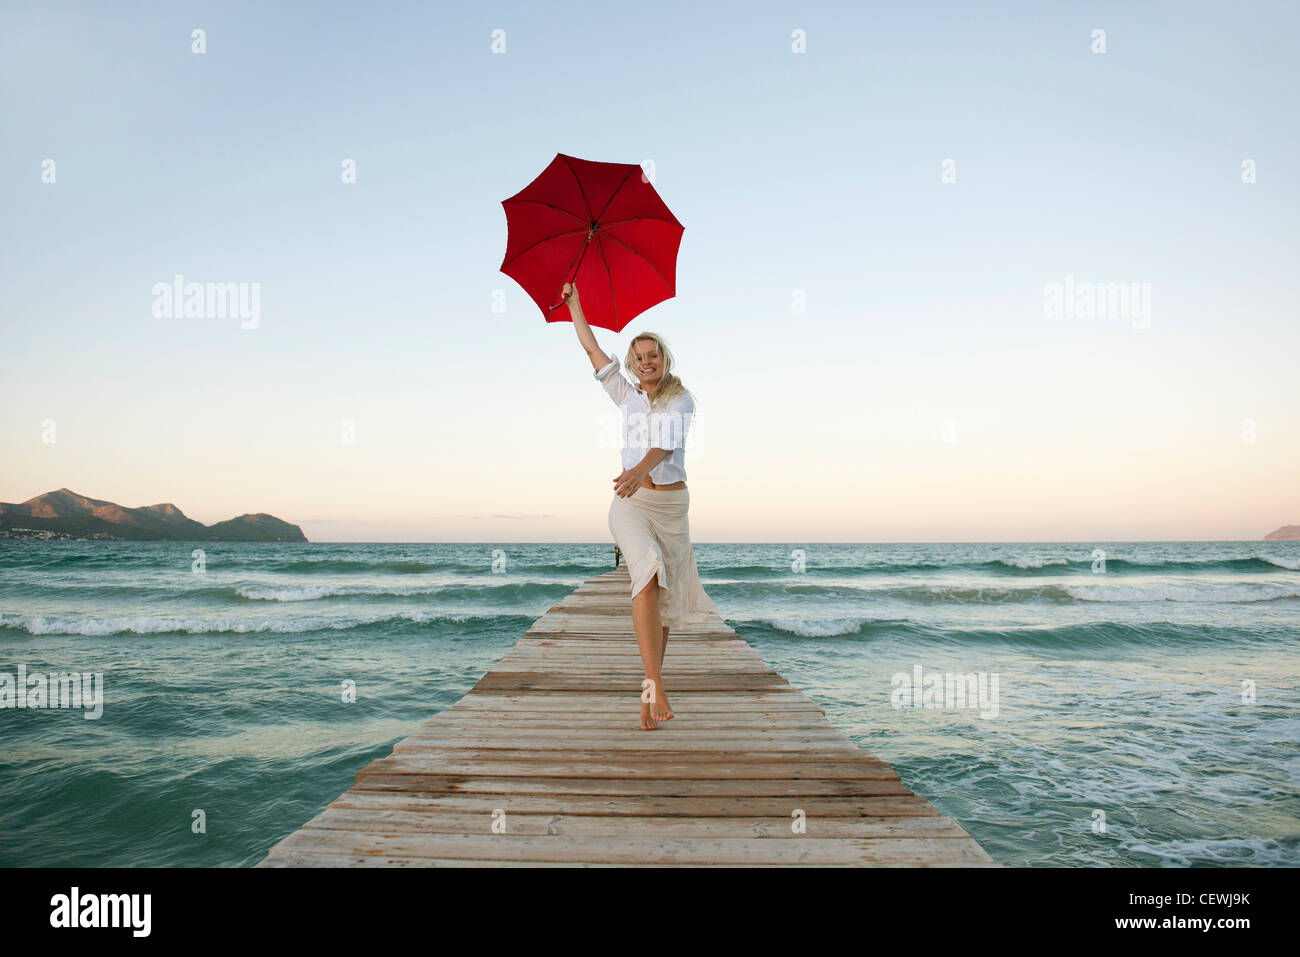 Young woman jumping on pier holding umbrella Stock Photo